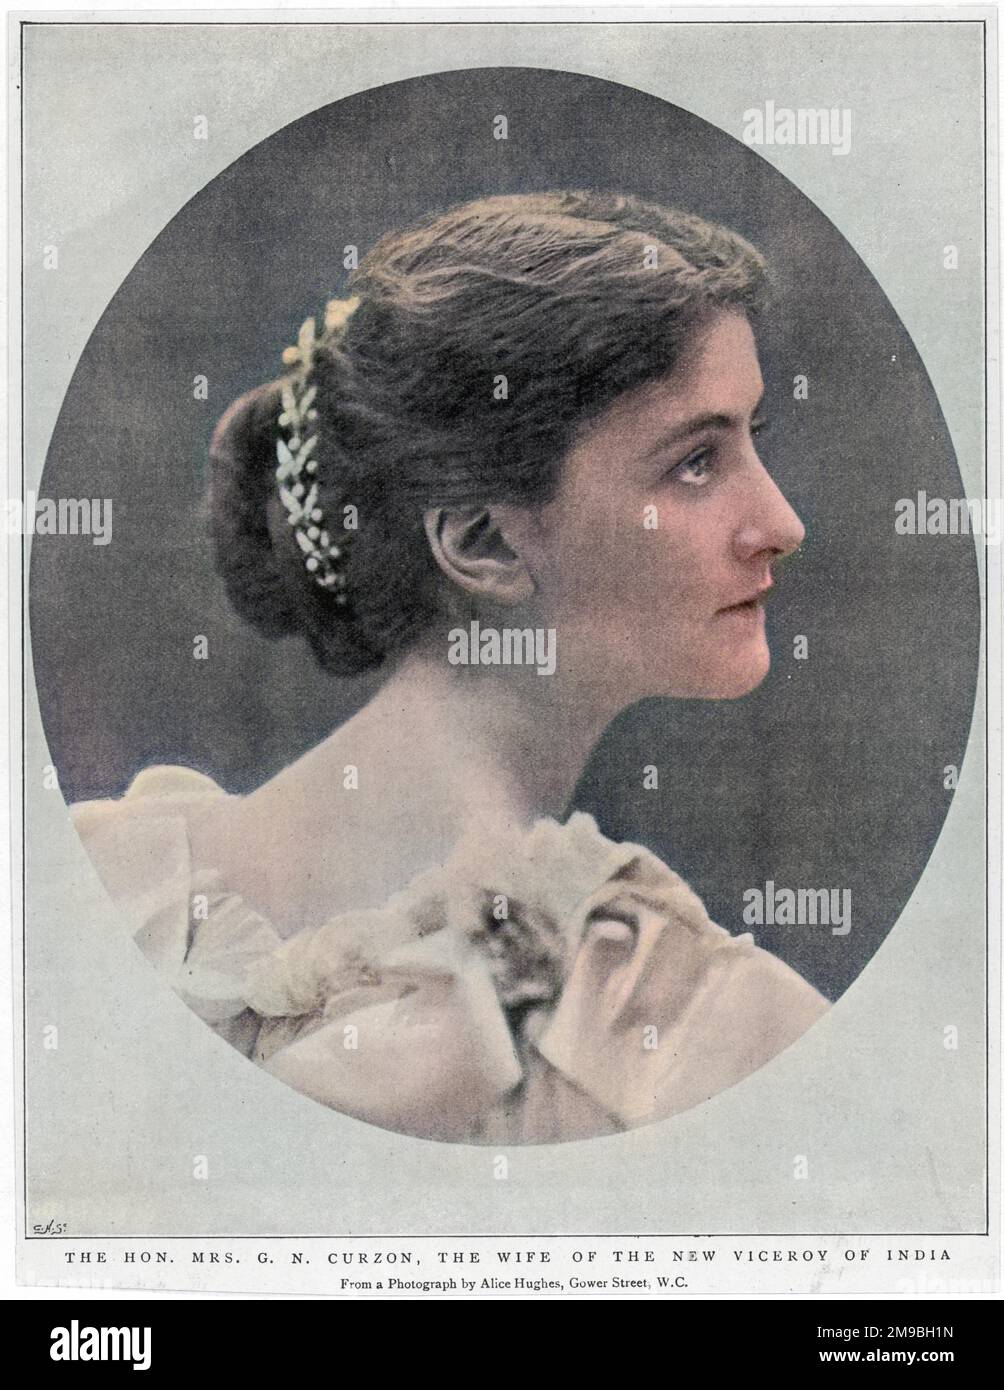 MARY VICTORIA (nee Leiter) marchioness CURZON, wife of George, Viceroy of India : daughter of an American millionaire, beautiful and supportive of his career. Stock Photo